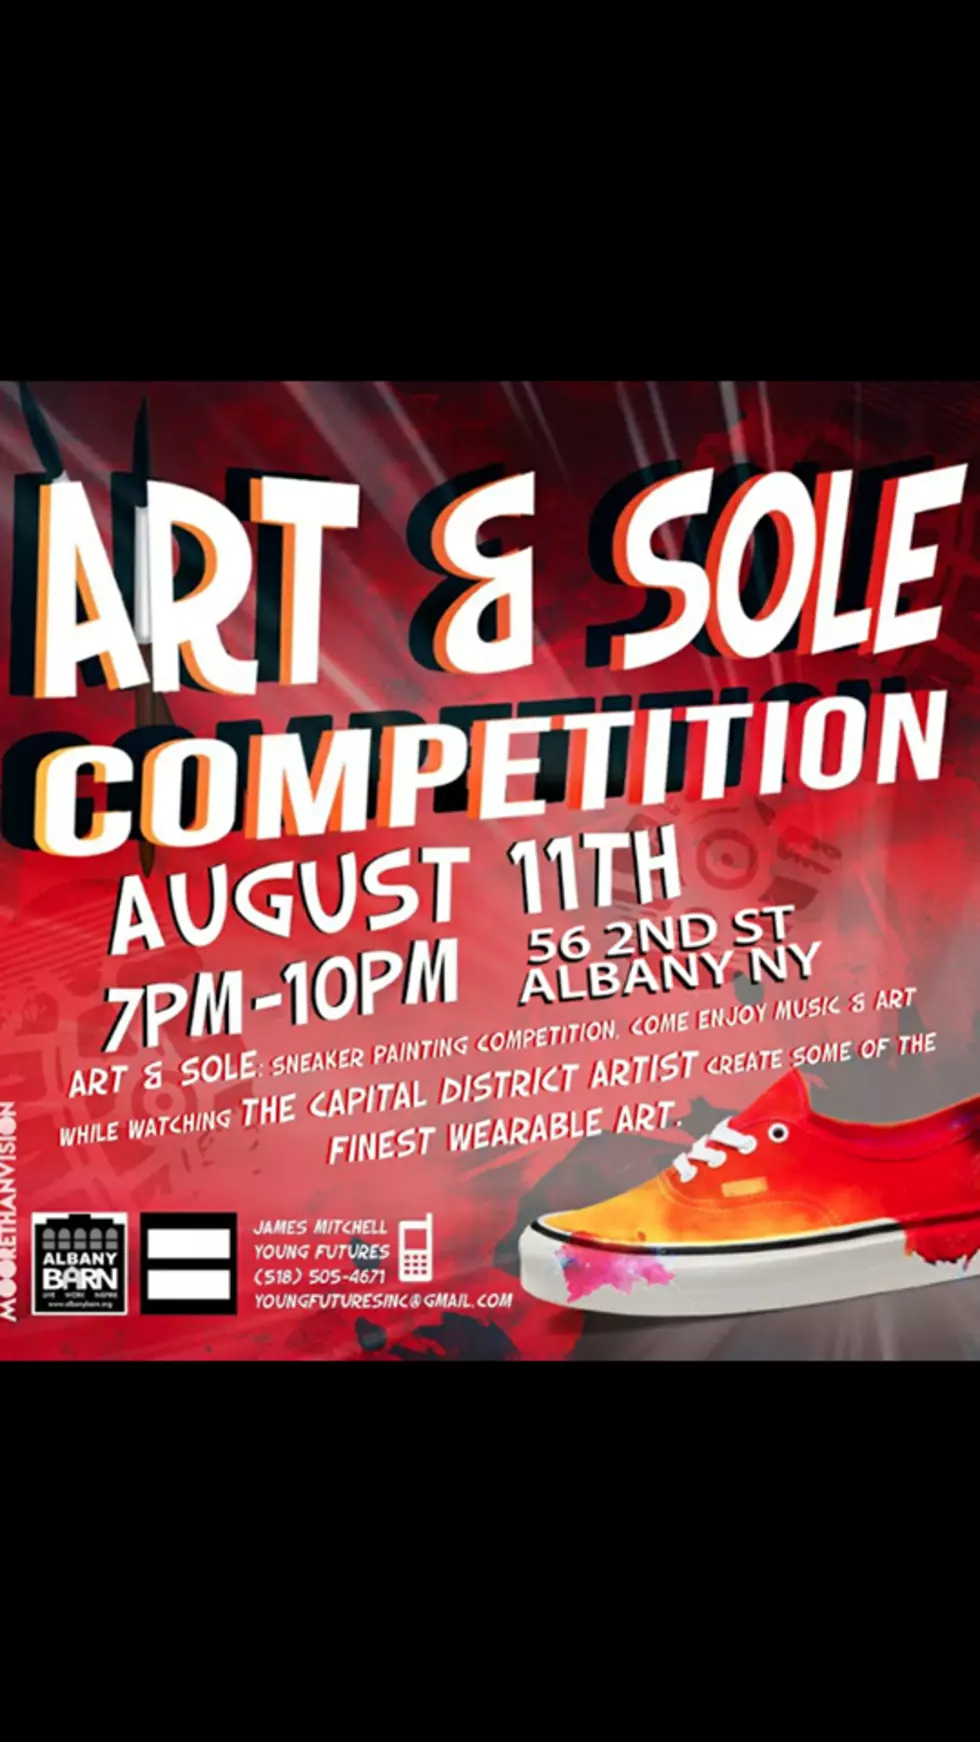 Art & Sole The Competition